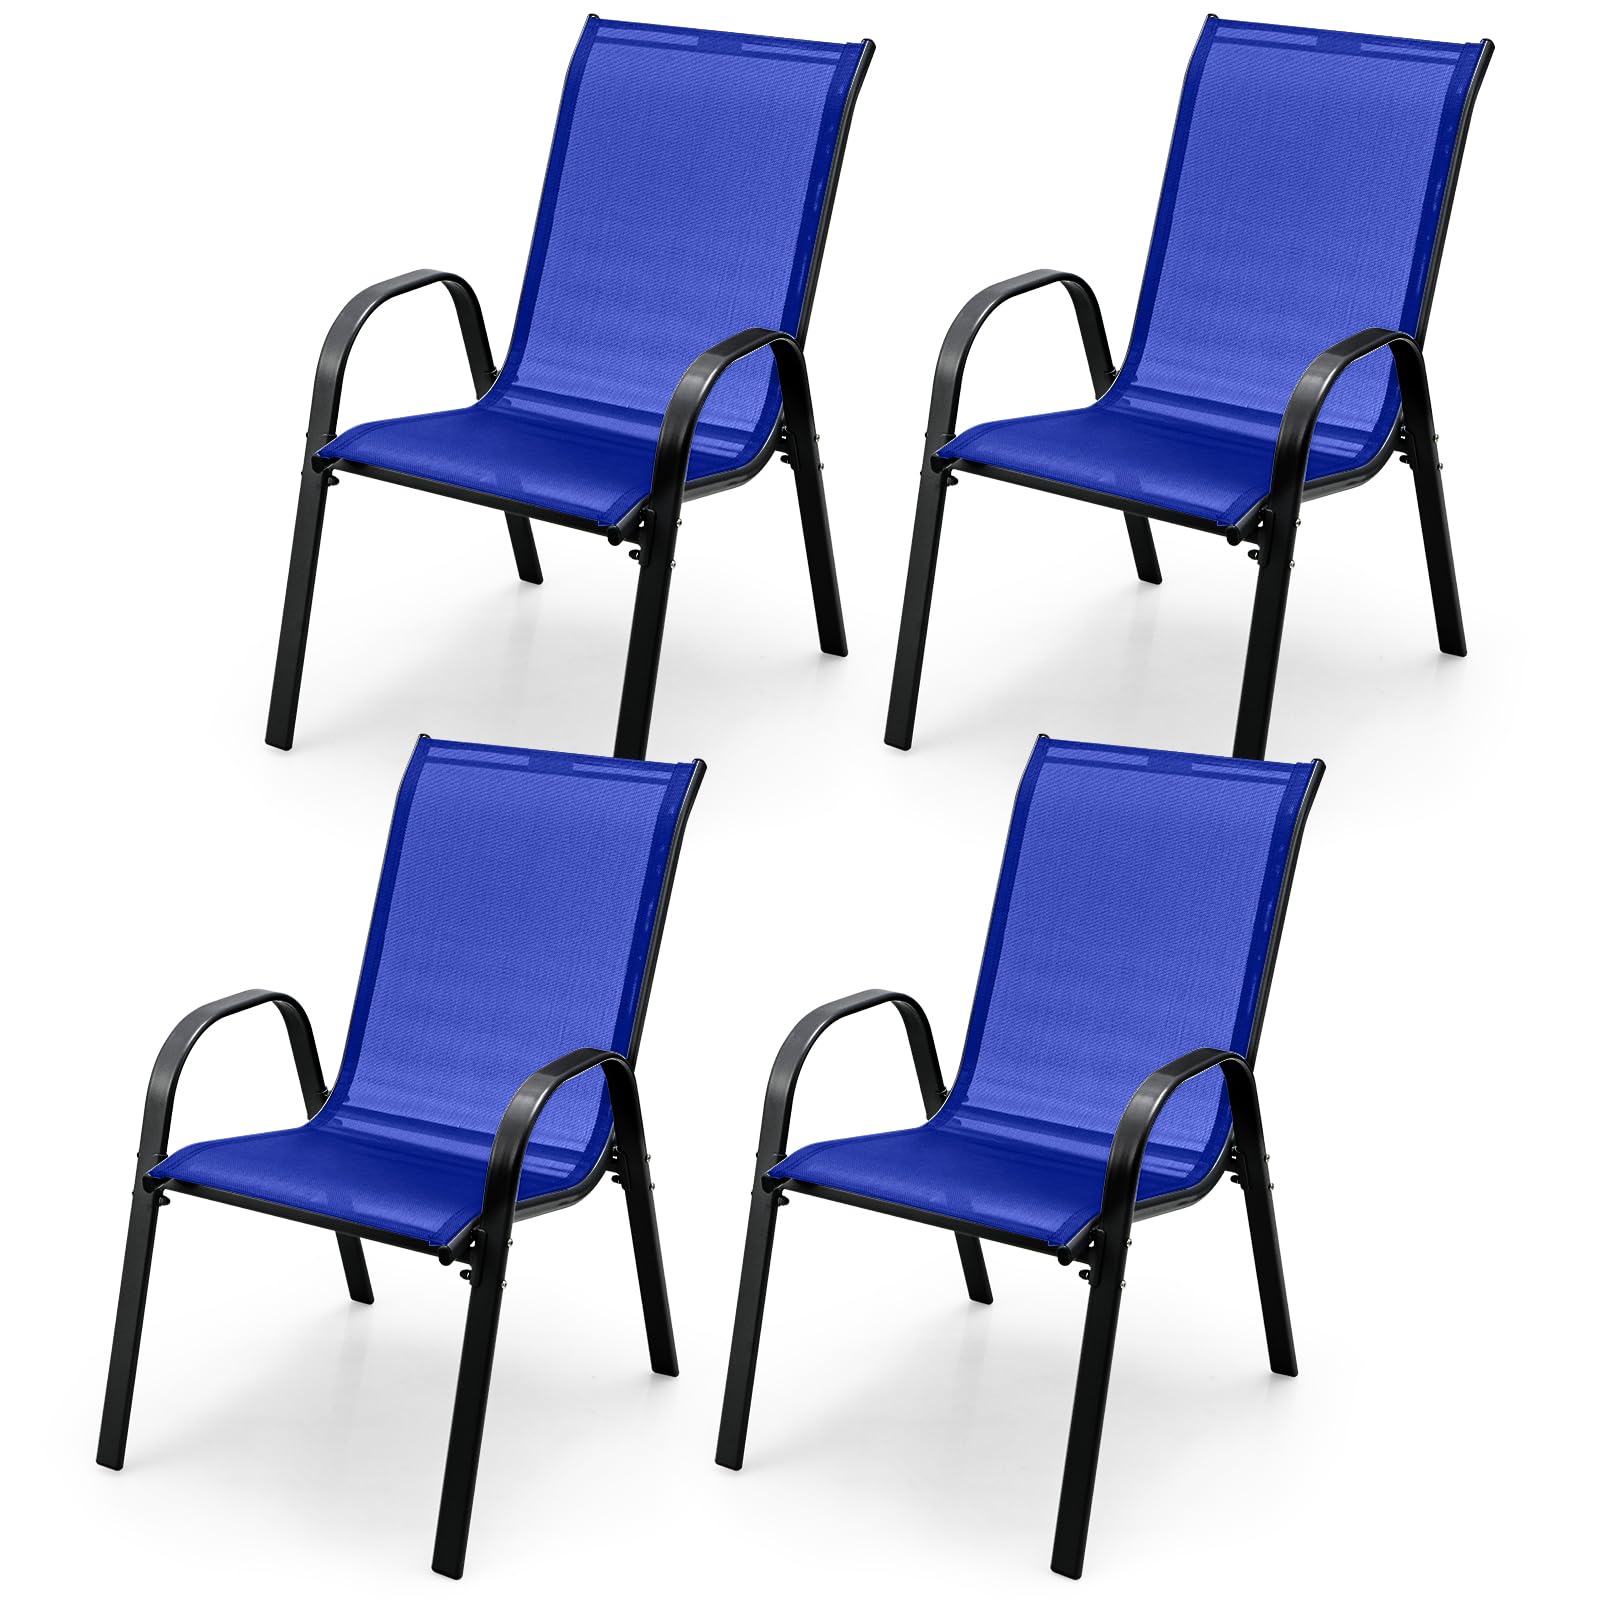 Giantex Set of 4 Patio Chairs, Outdoor Dining Chairs W/Curved Armrests